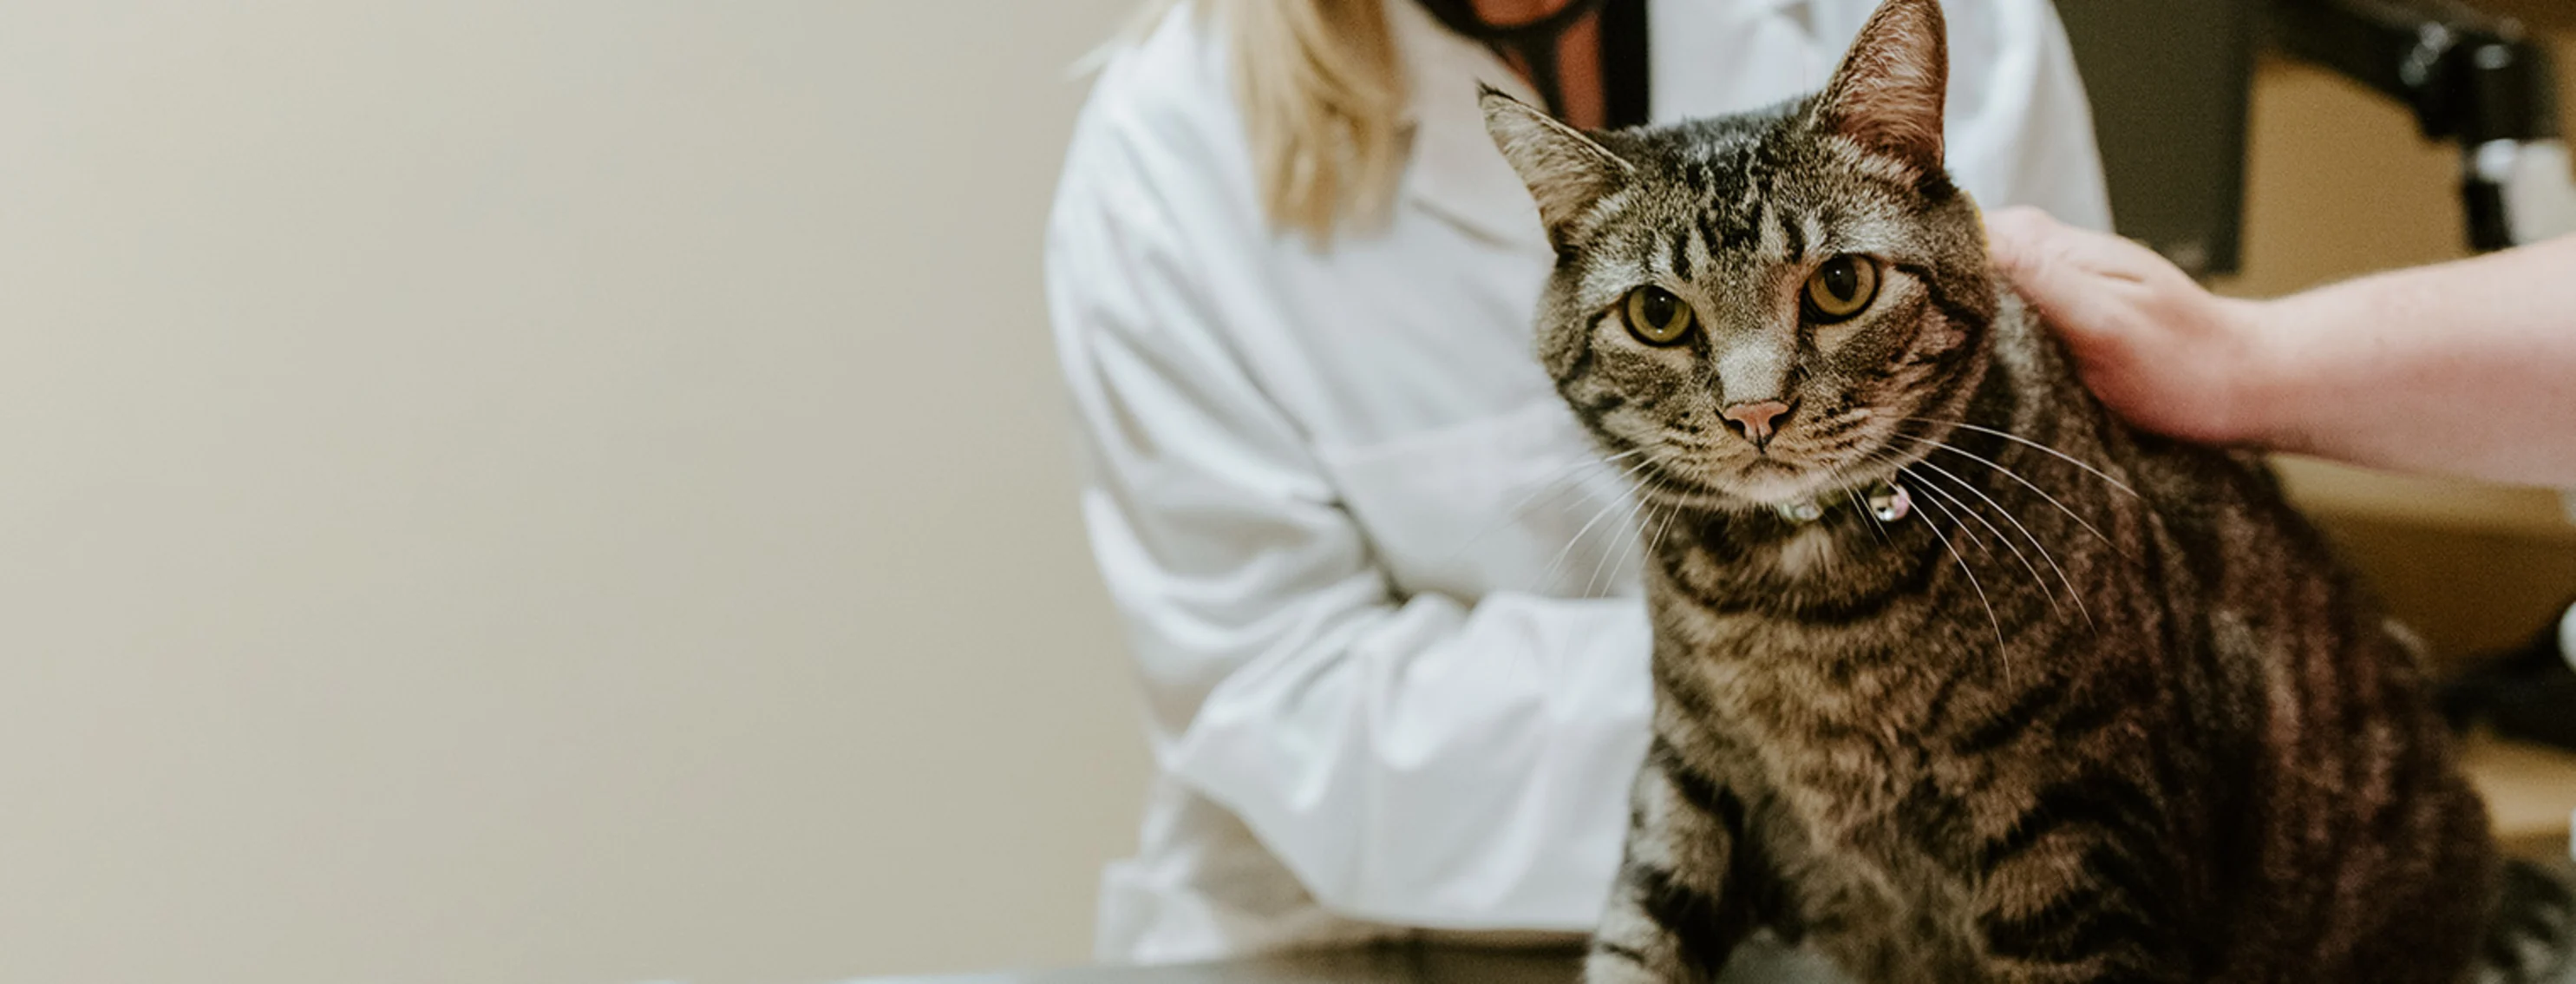 Cat looking at the camera while veterinarian holding the cat on the table in an exam room.